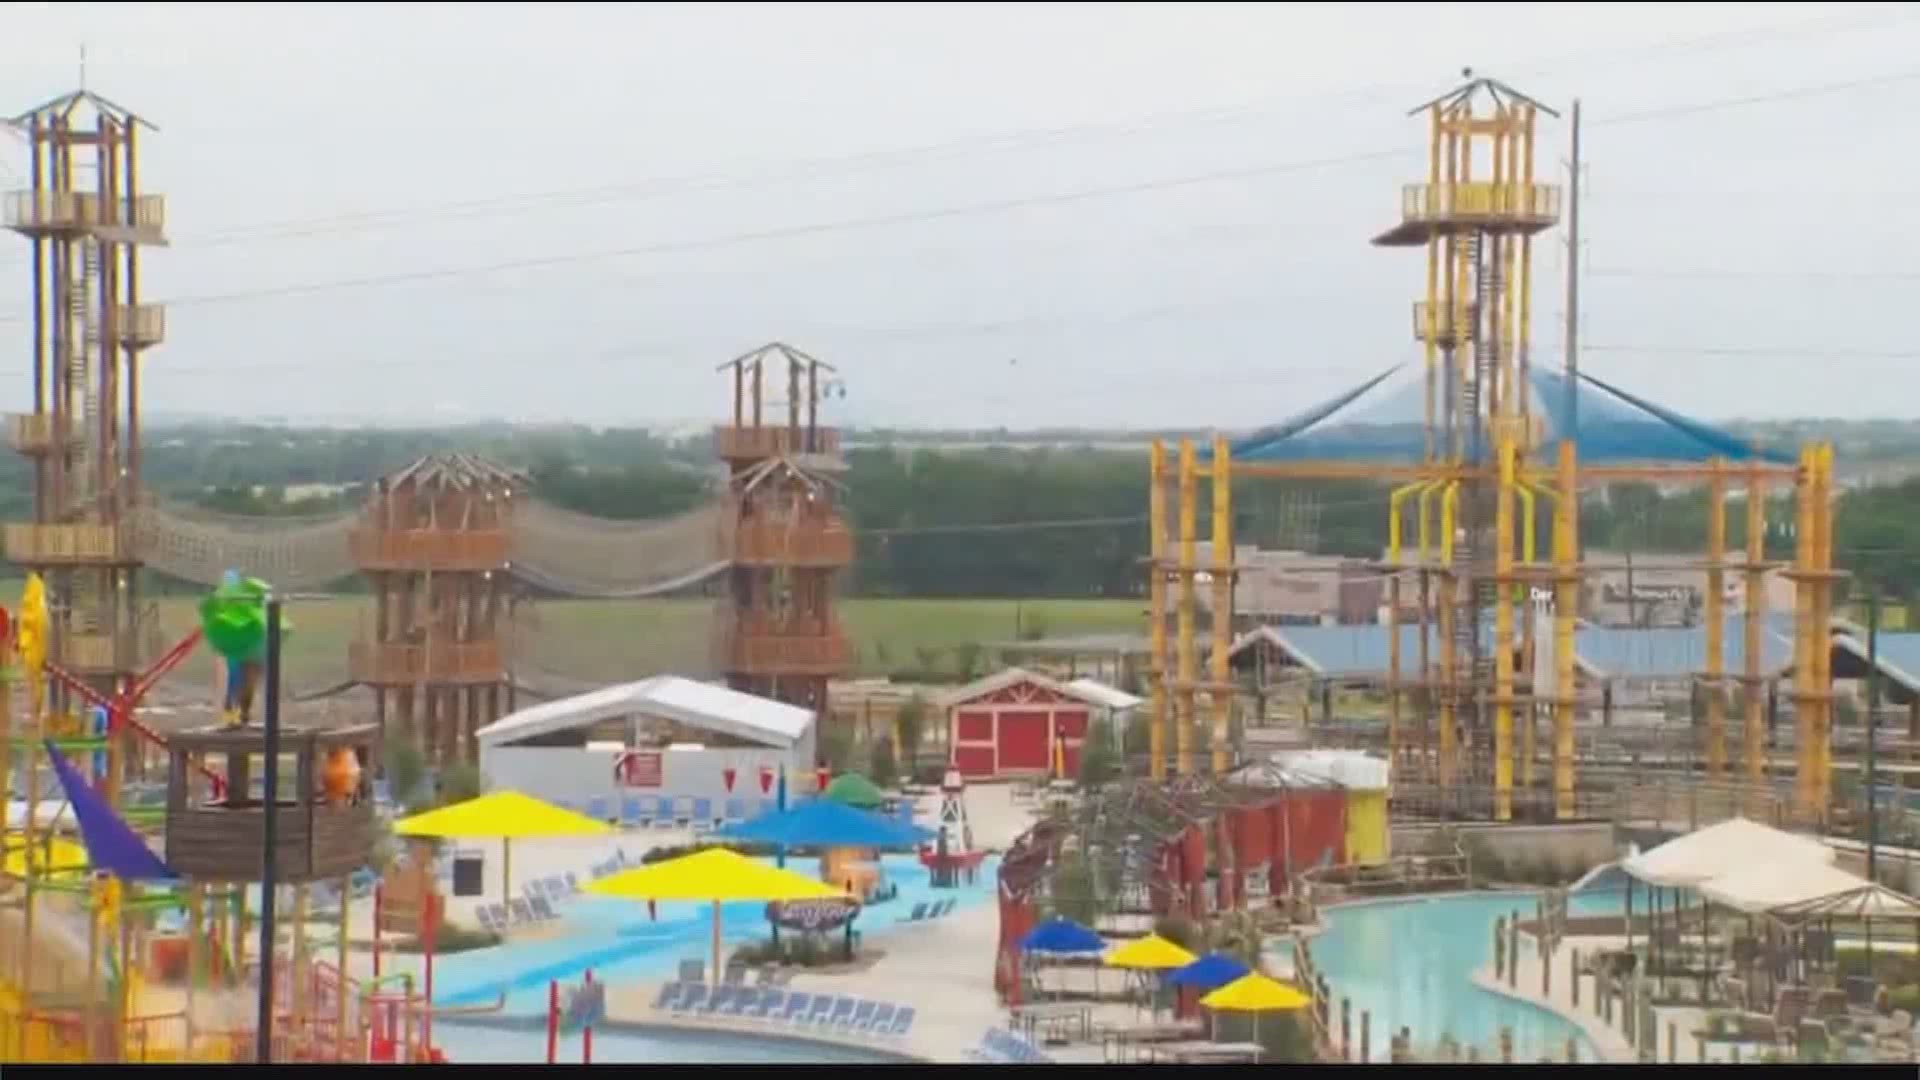 Typhoon Texas Austin opening delayed due to COVID19